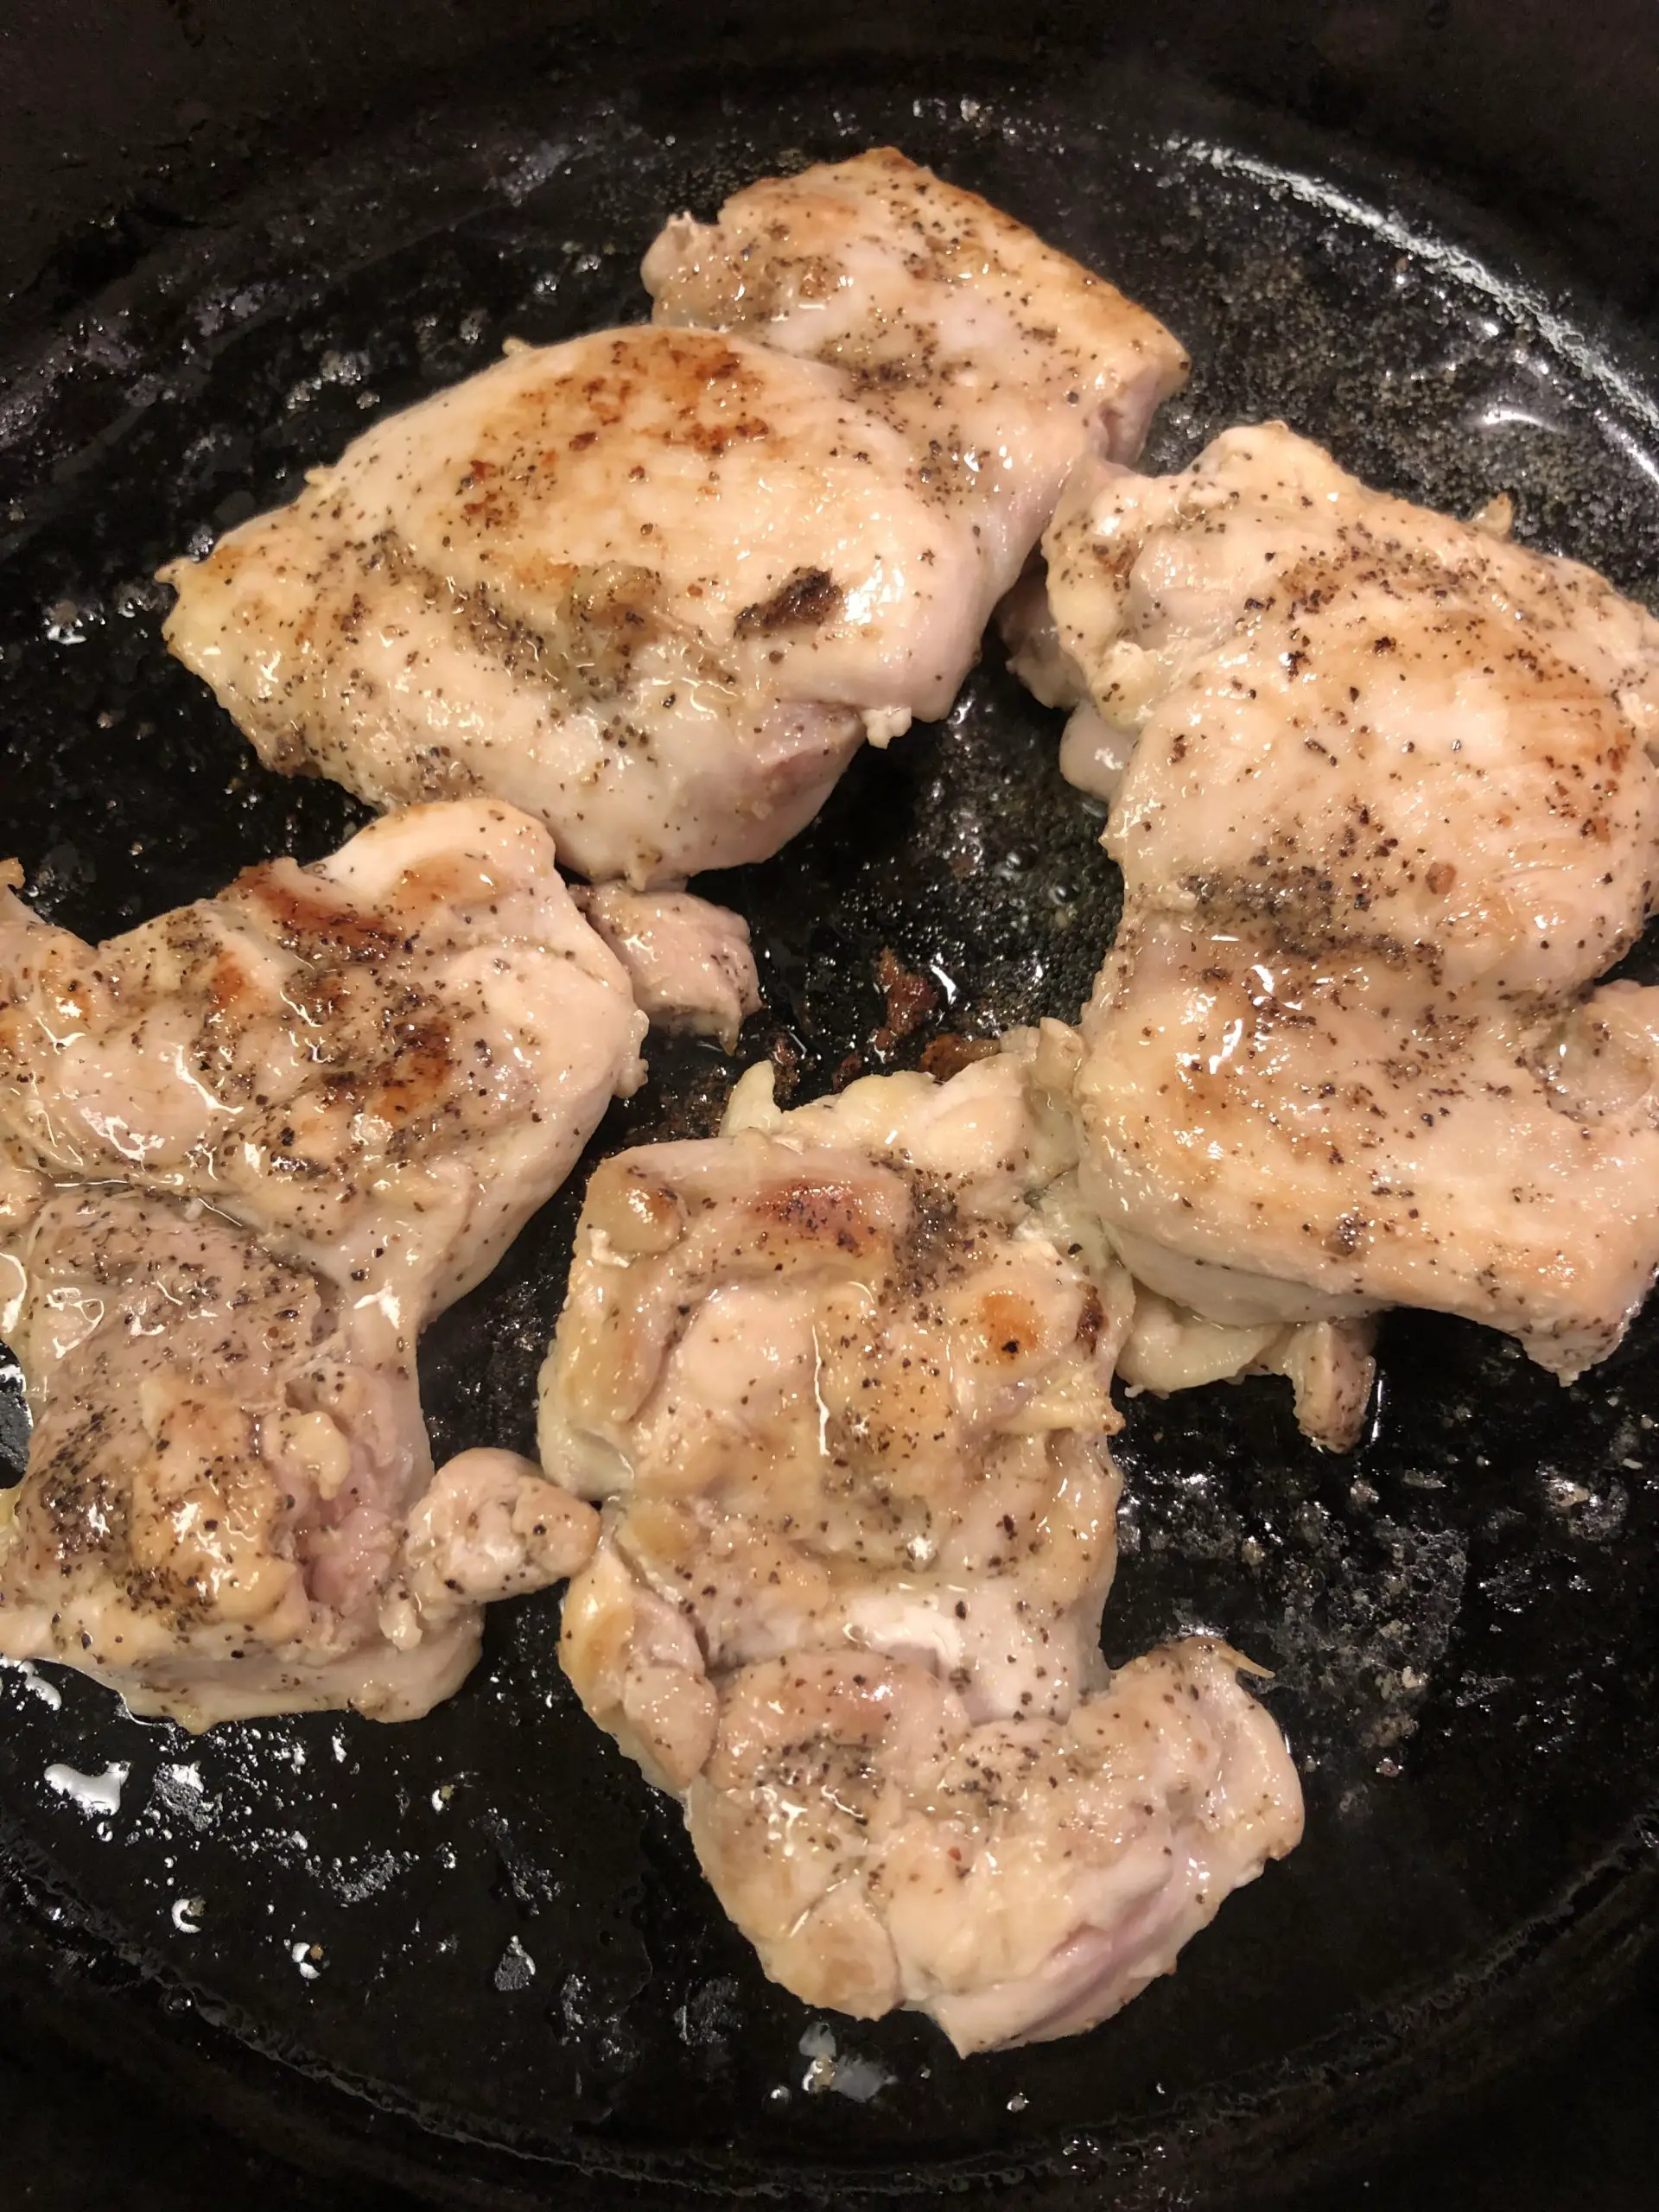 Chicken thighs frying in a cast iron skillet seasoned with pepper and starting to brown.